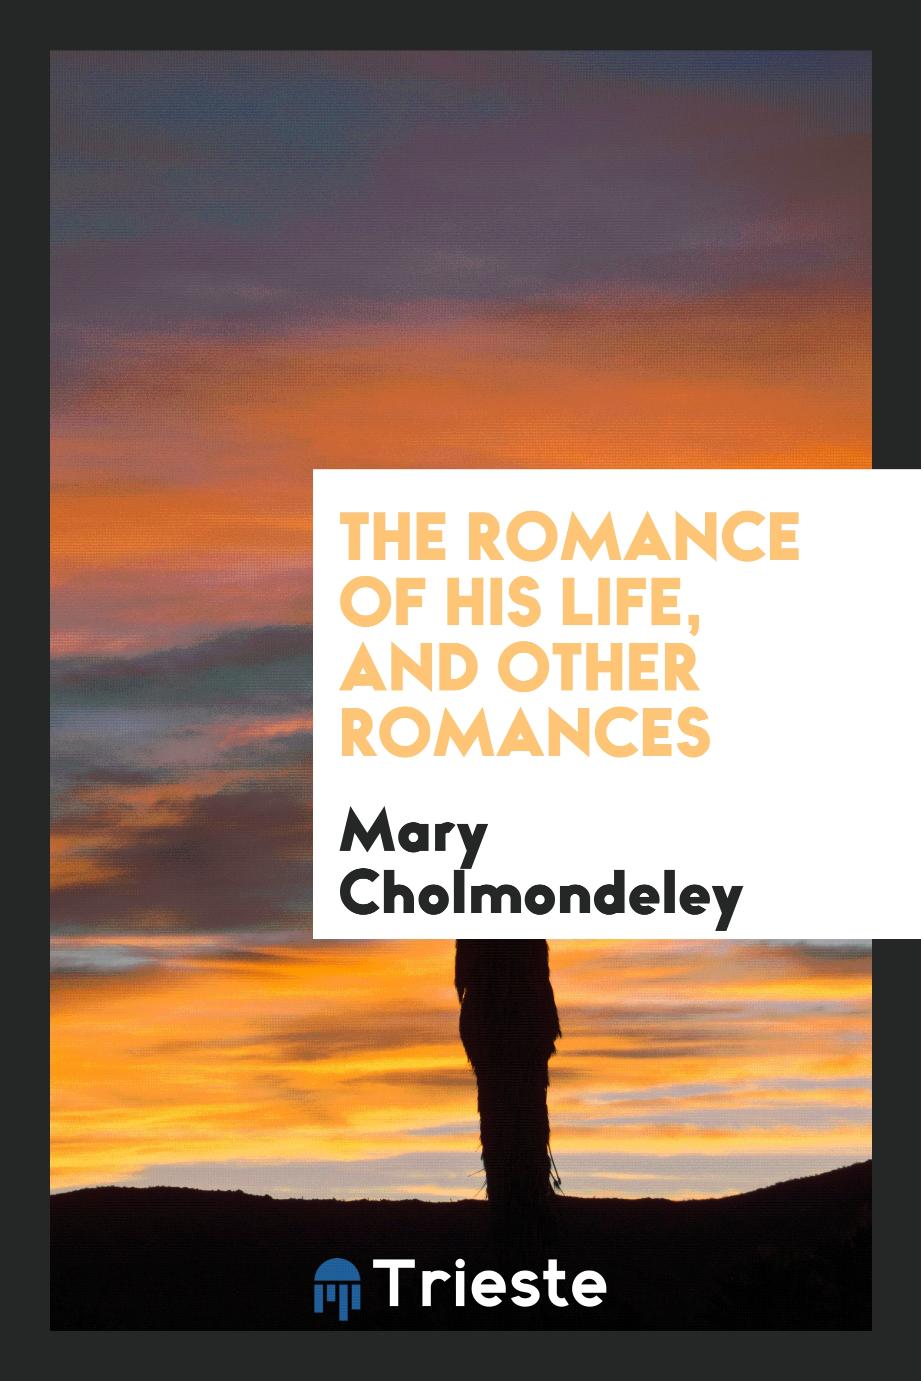 The romance of his life, and other romances